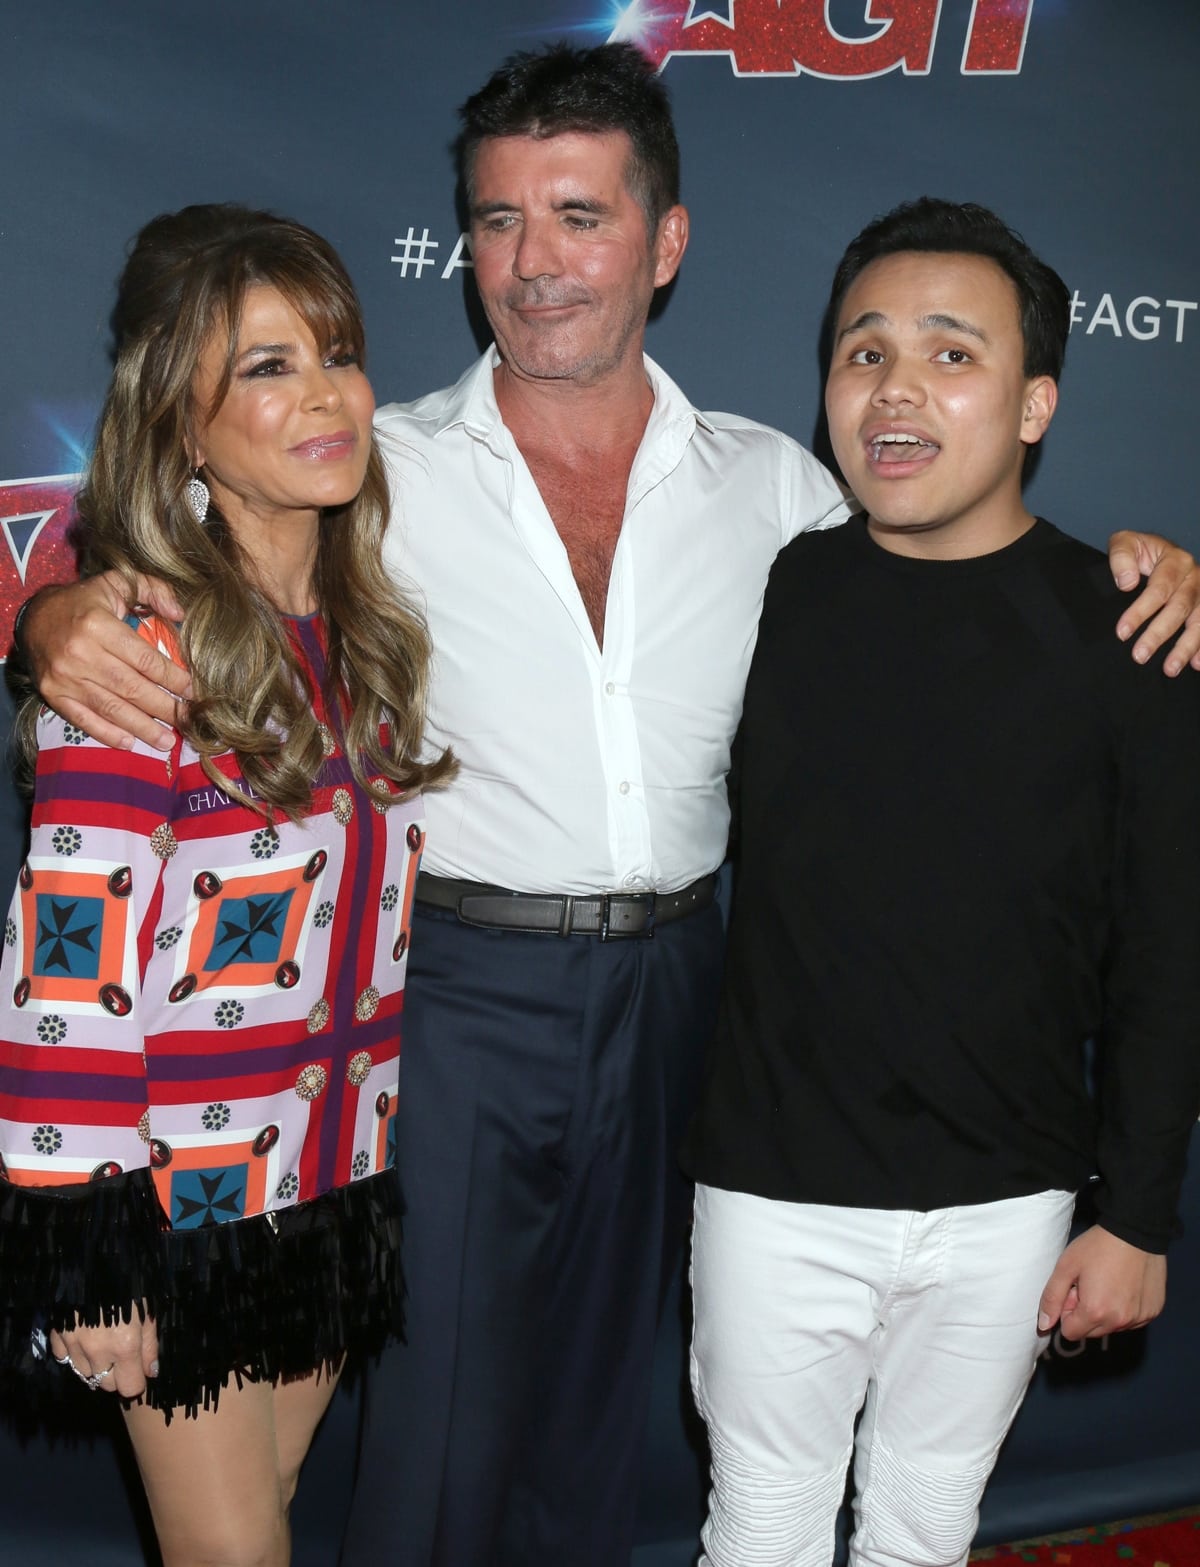 Paula Abdul and Simon Cowell posing with Kodi Lee, a legally blind Korean-American singer-songwriter and pianist who won the 14th season of the reality competition show America's Got Talent